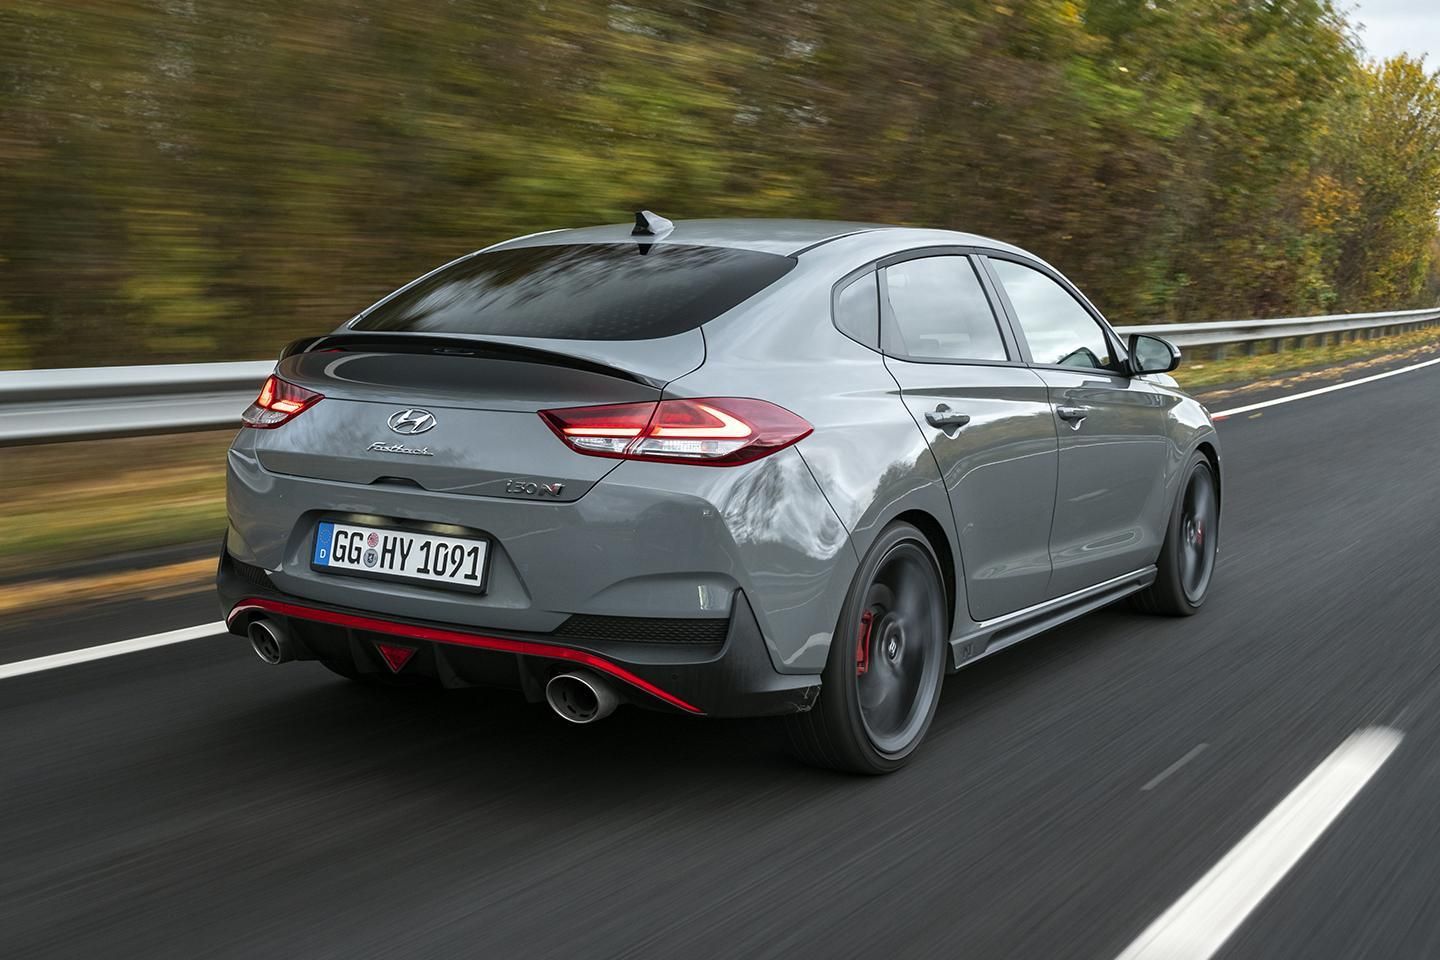 Hyundai i30N: This time it's automatic